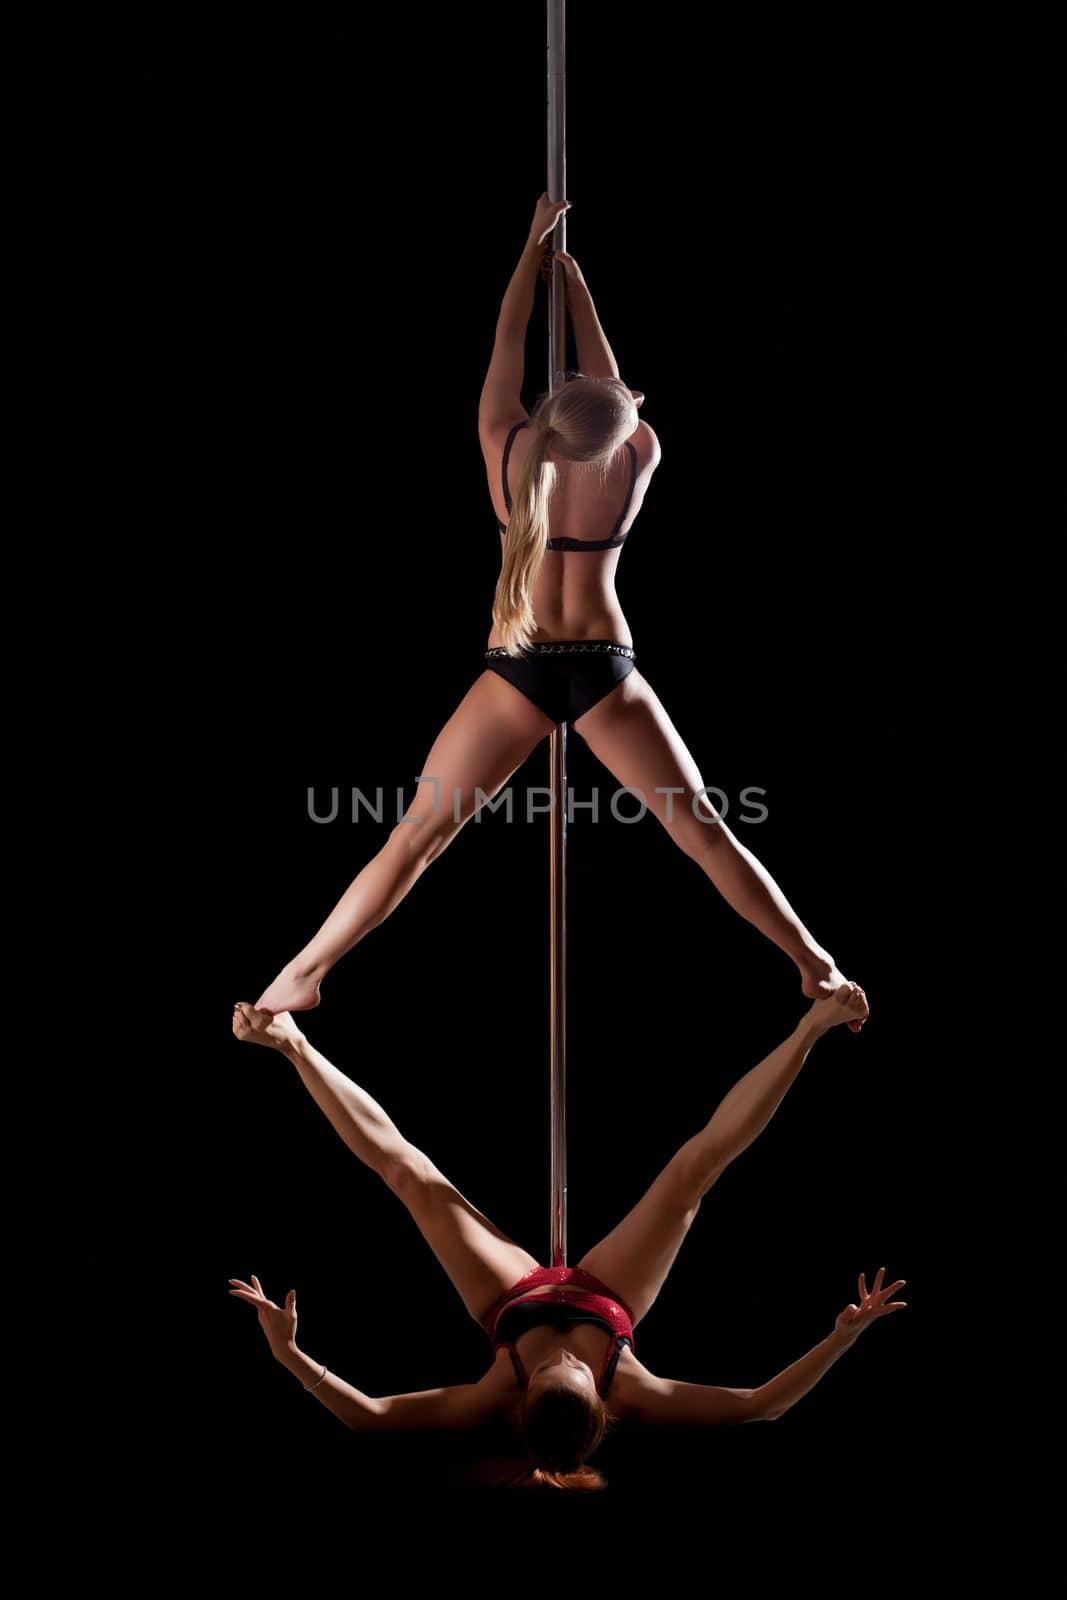 two women show high gymnastic level on pole dance by rivertime